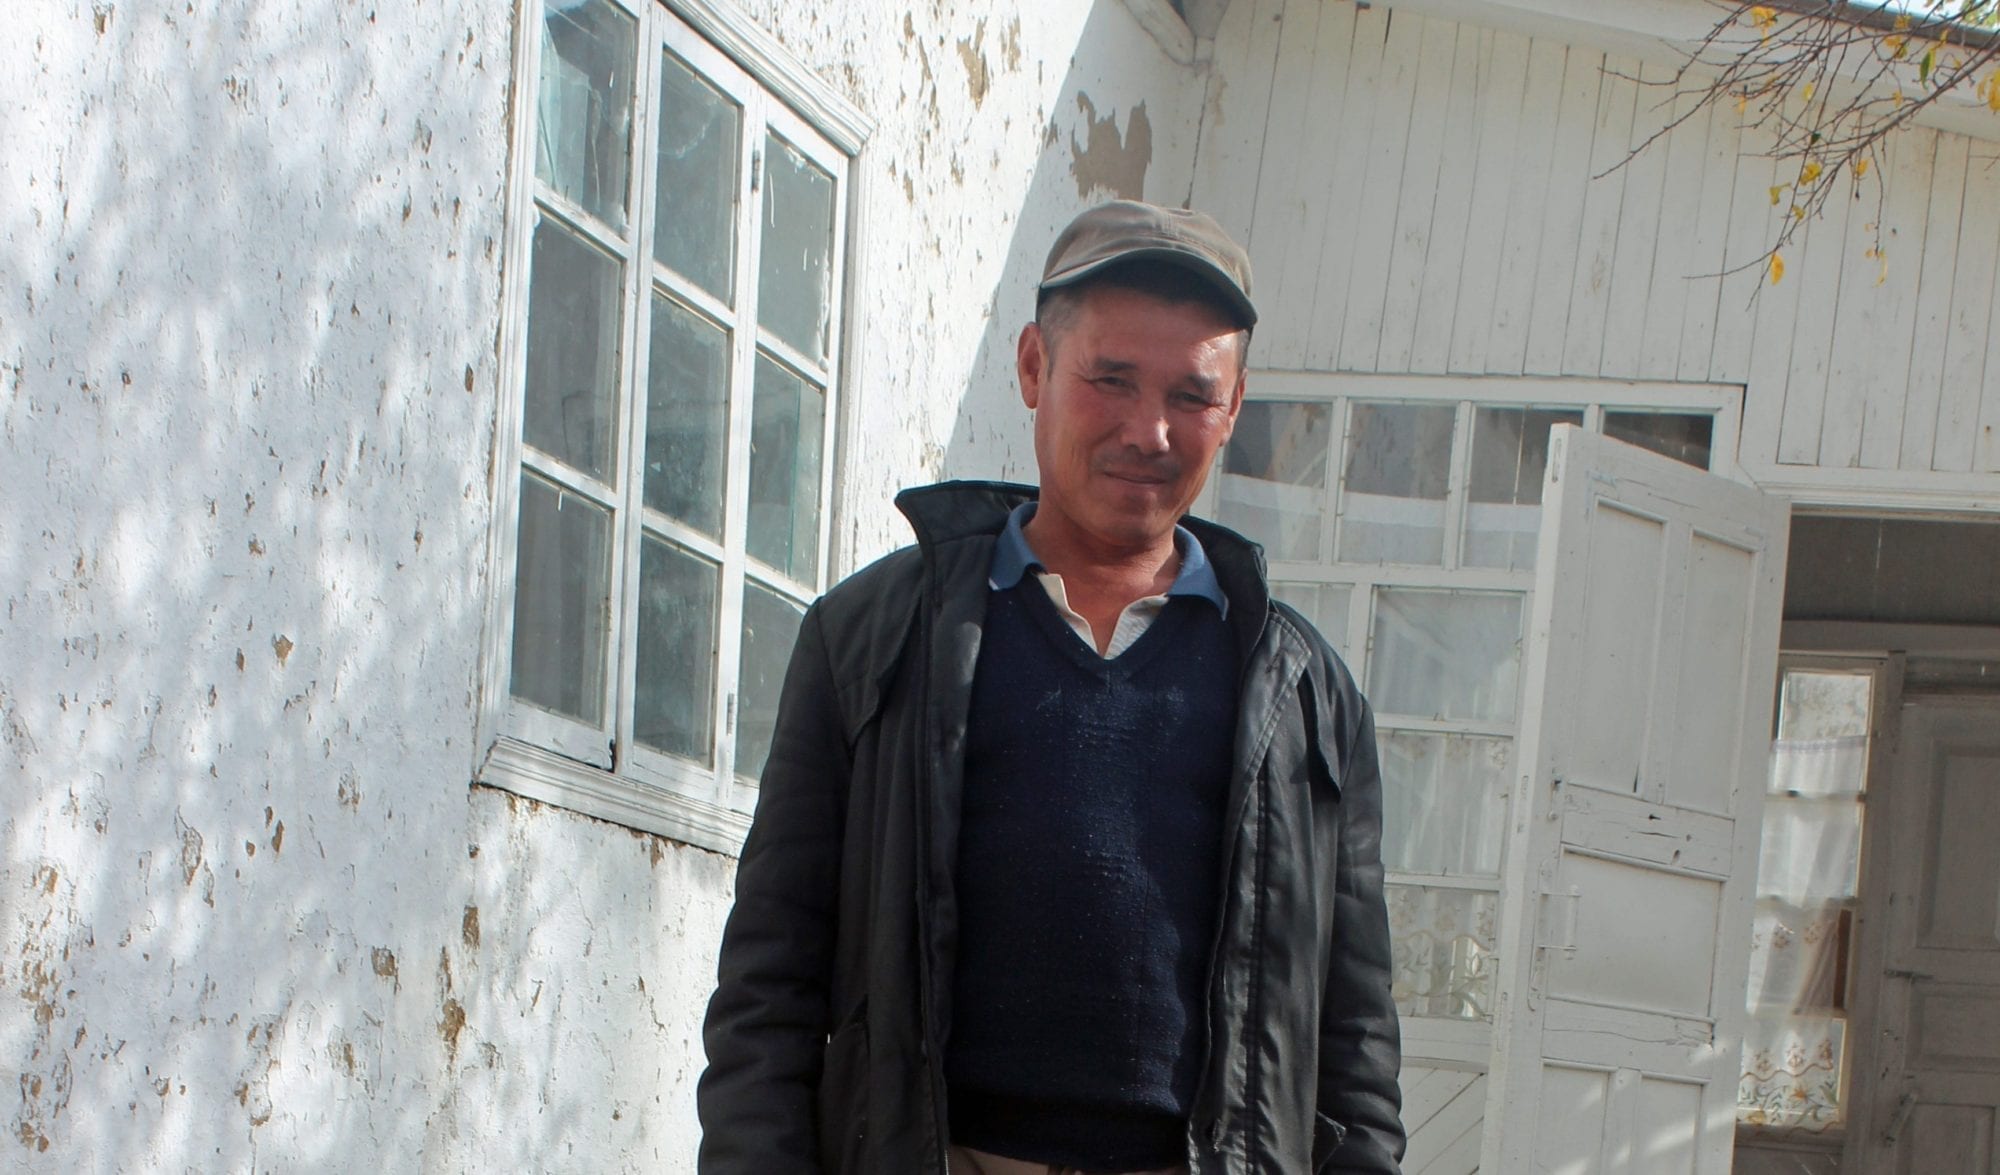 Kyrgyz Worker in Kazakhstan Paid $100 for 6 Months’ Work